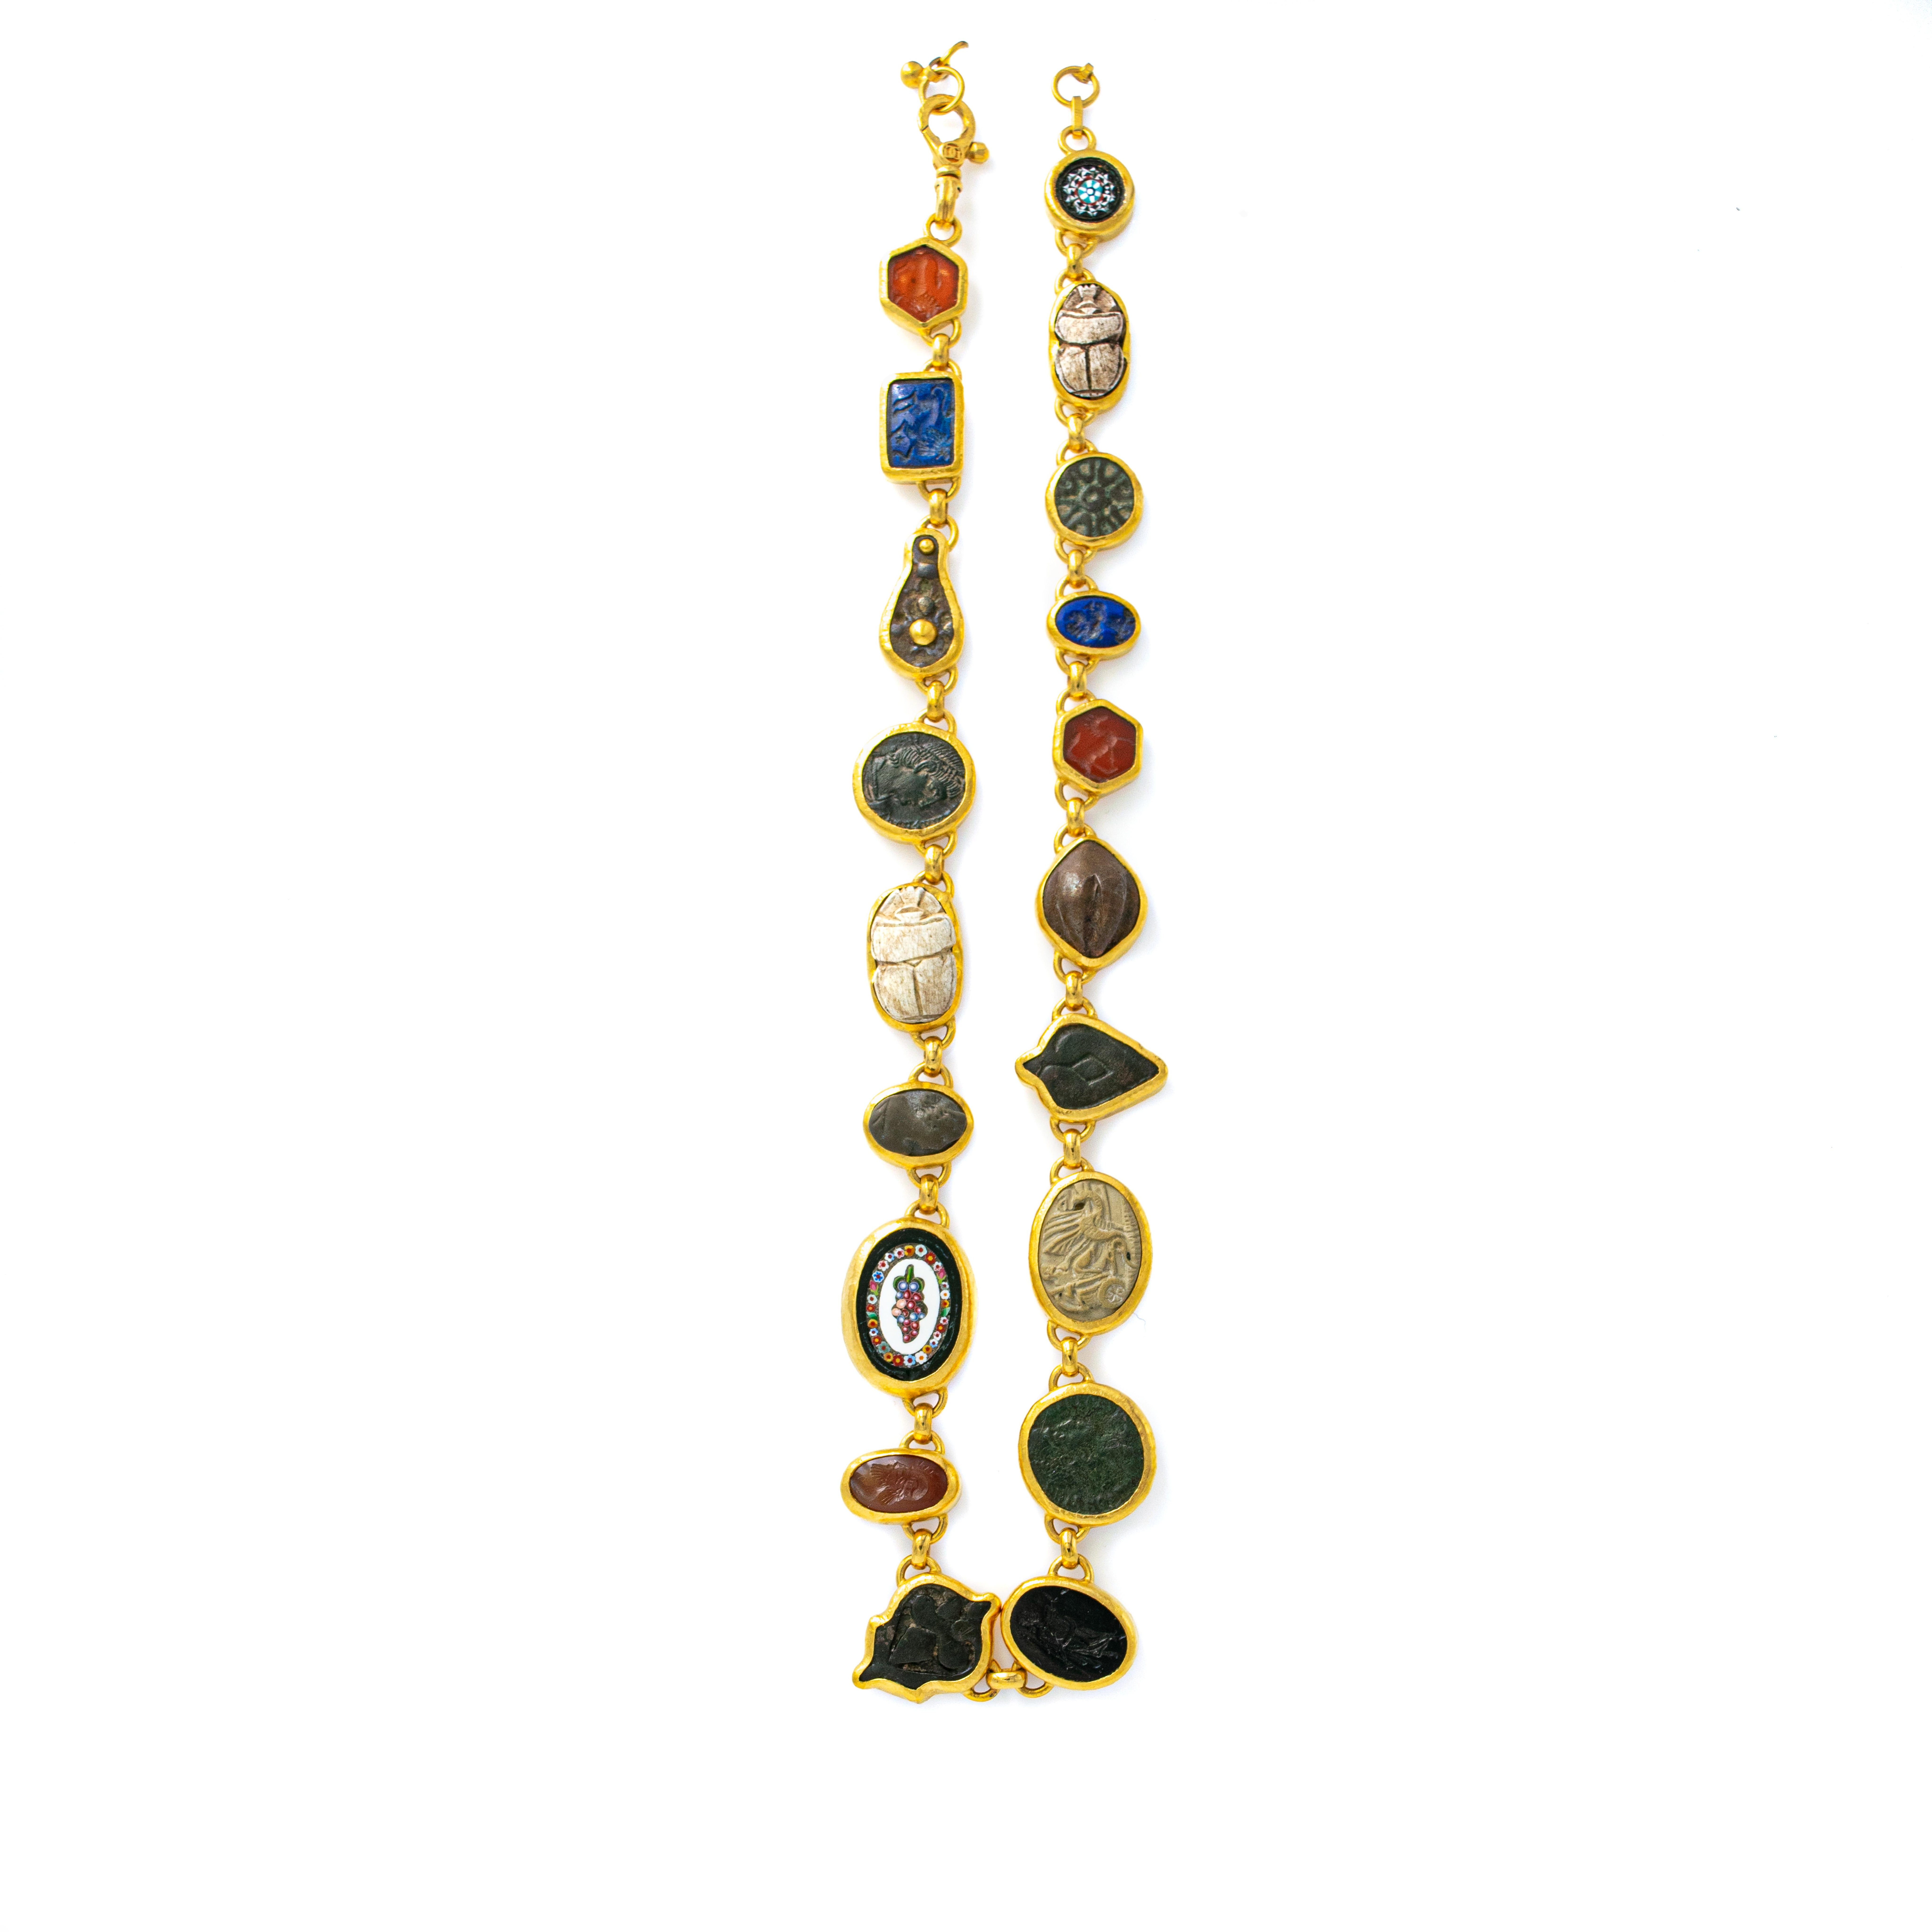 From Gurhan’s remarkable collection of handmade 24k gold treasures, inspired by the sensuality of pure gold, each jewel illuminates the golden warmth of the feminine spirit.

One of a kind antiquities are united by Gurhan in this all-around necklace